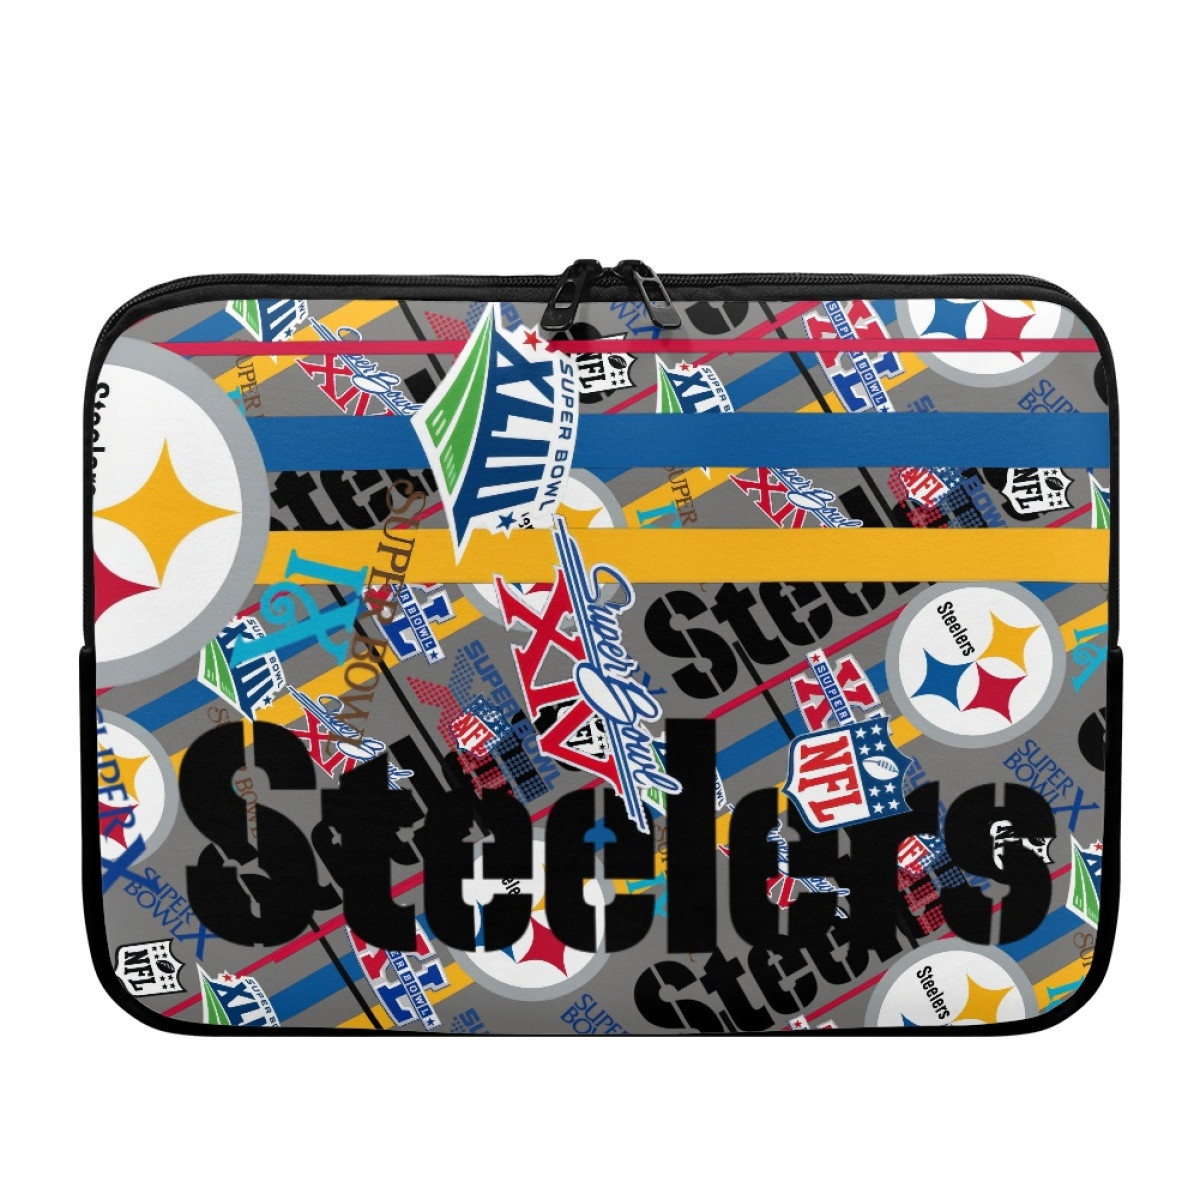 NFL Pittsburgh Steelers Laptop Sleeve Carrying Case For 10 12 13 15 17 Inch Notebook - Pittsburgh Steelers Super Bowl Championship Mania Collage Logo